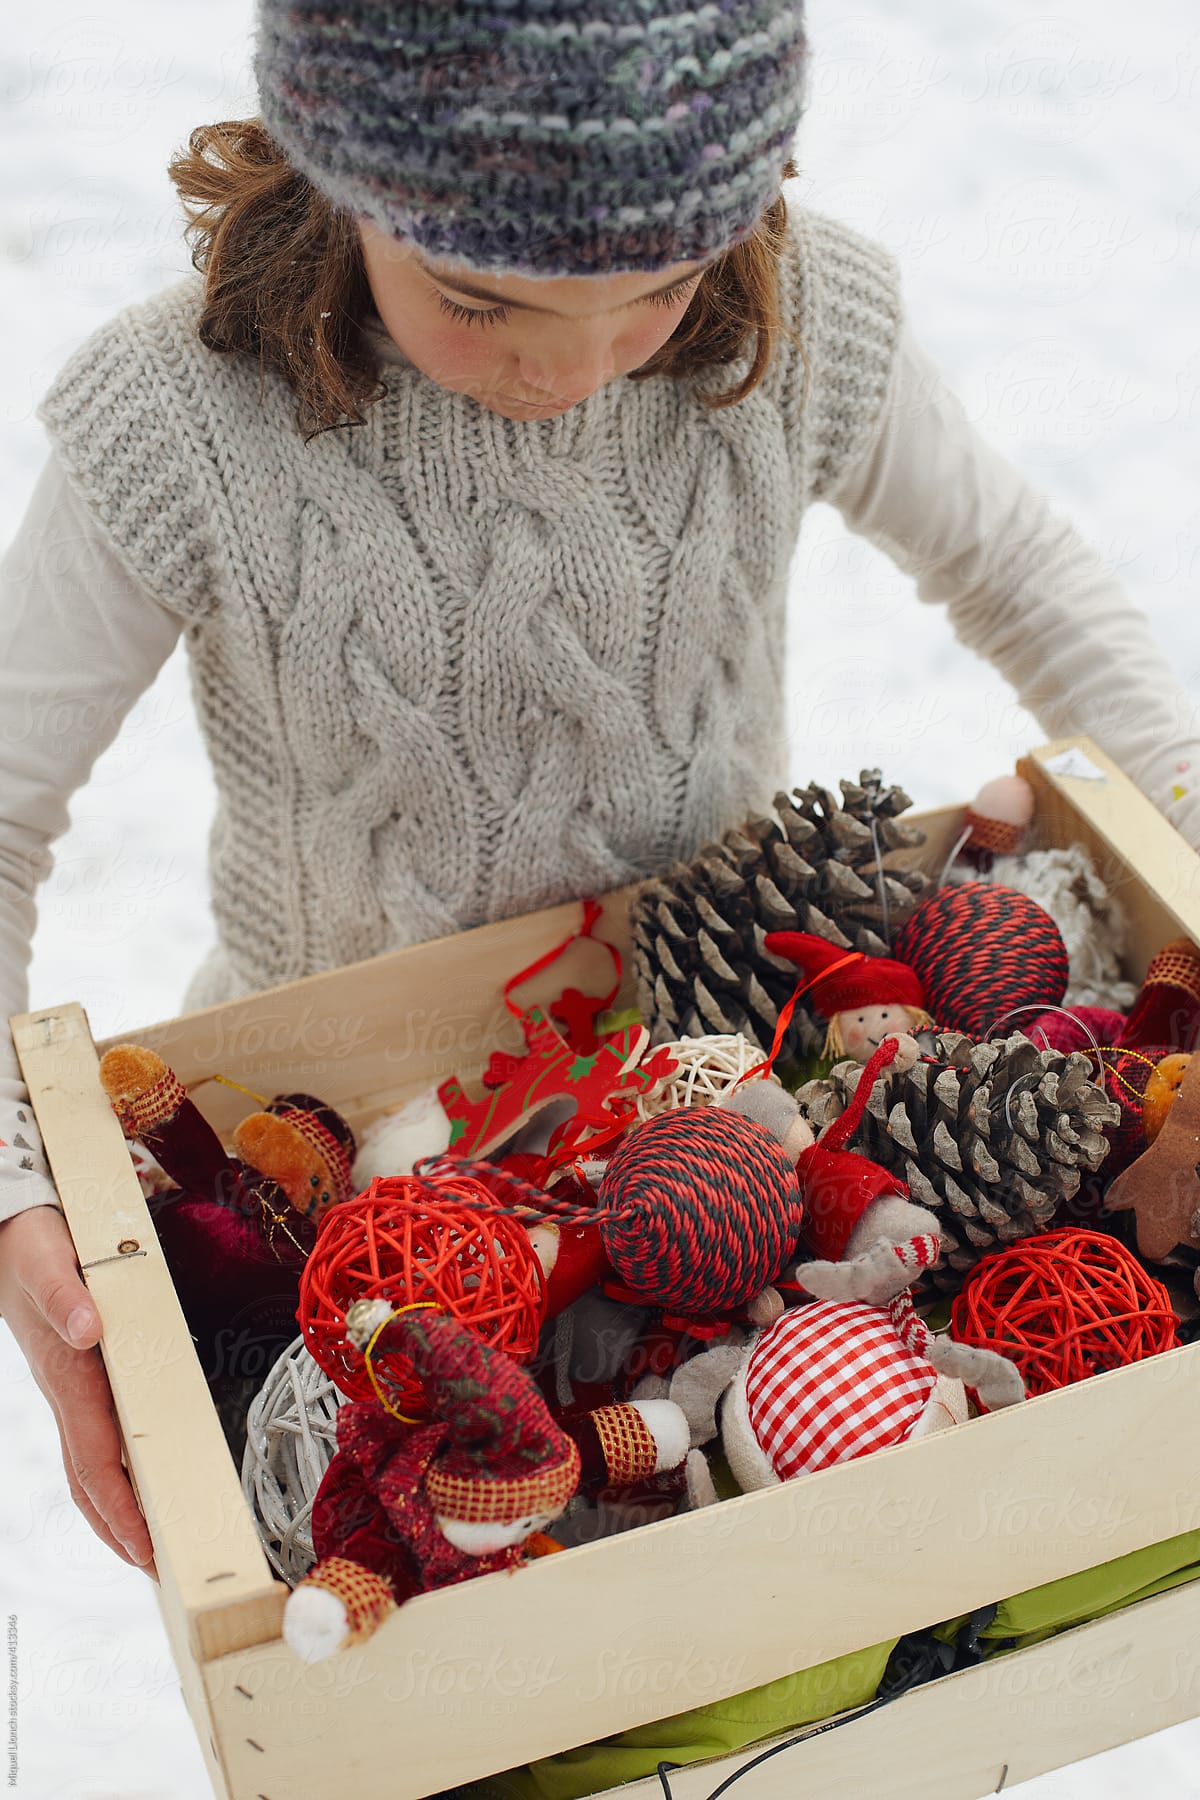 Young girl holding a box full of Christmas ornaments